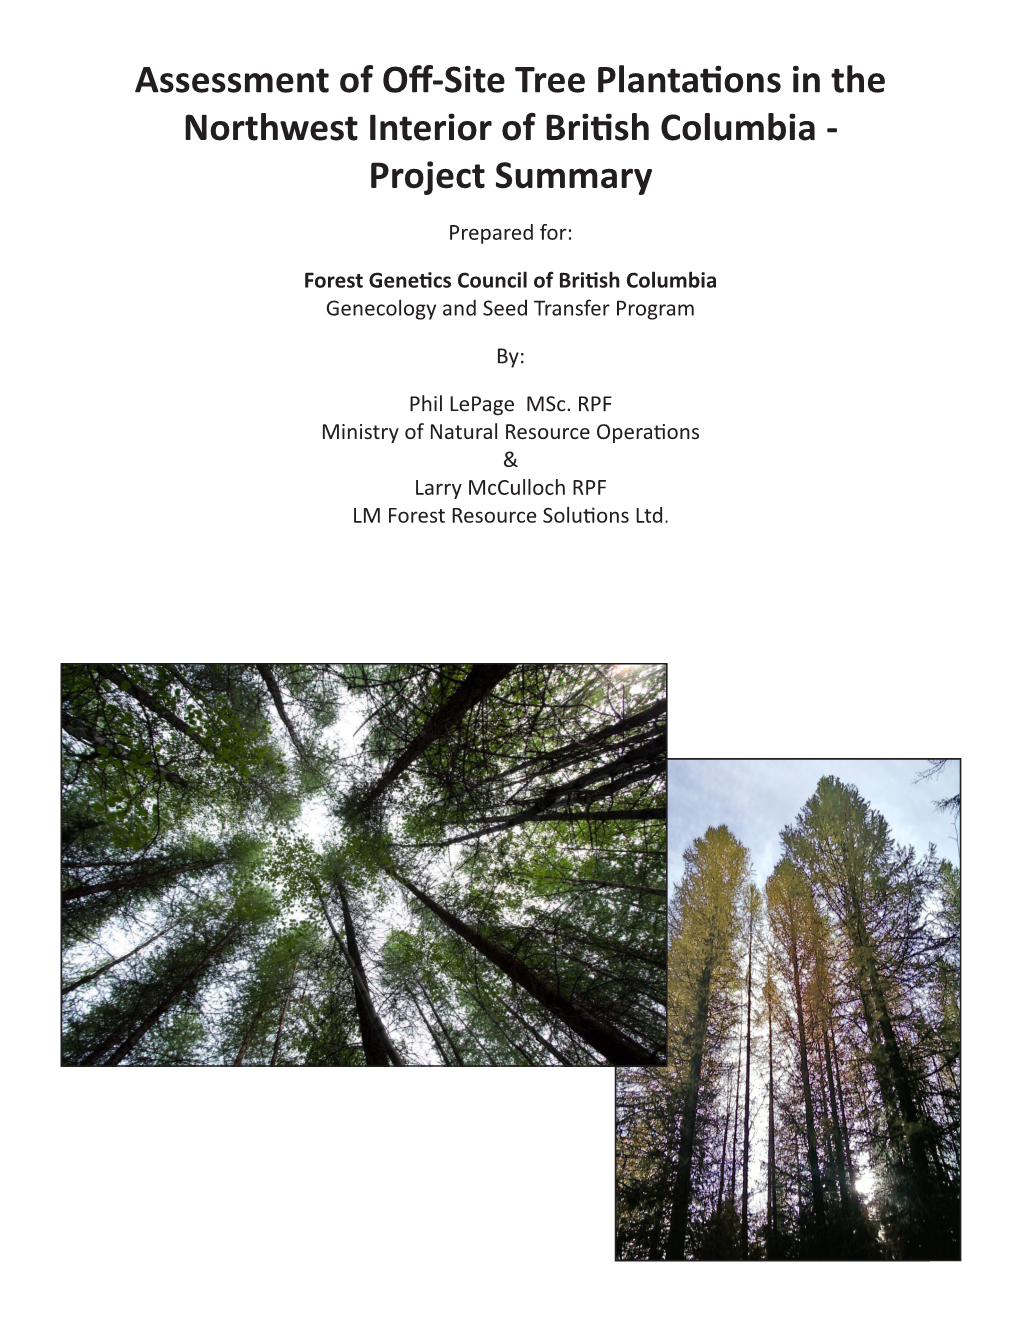 Assessment of Off-Site Tree Plantations in the Northwest Interior of British Columbia - Project Summary